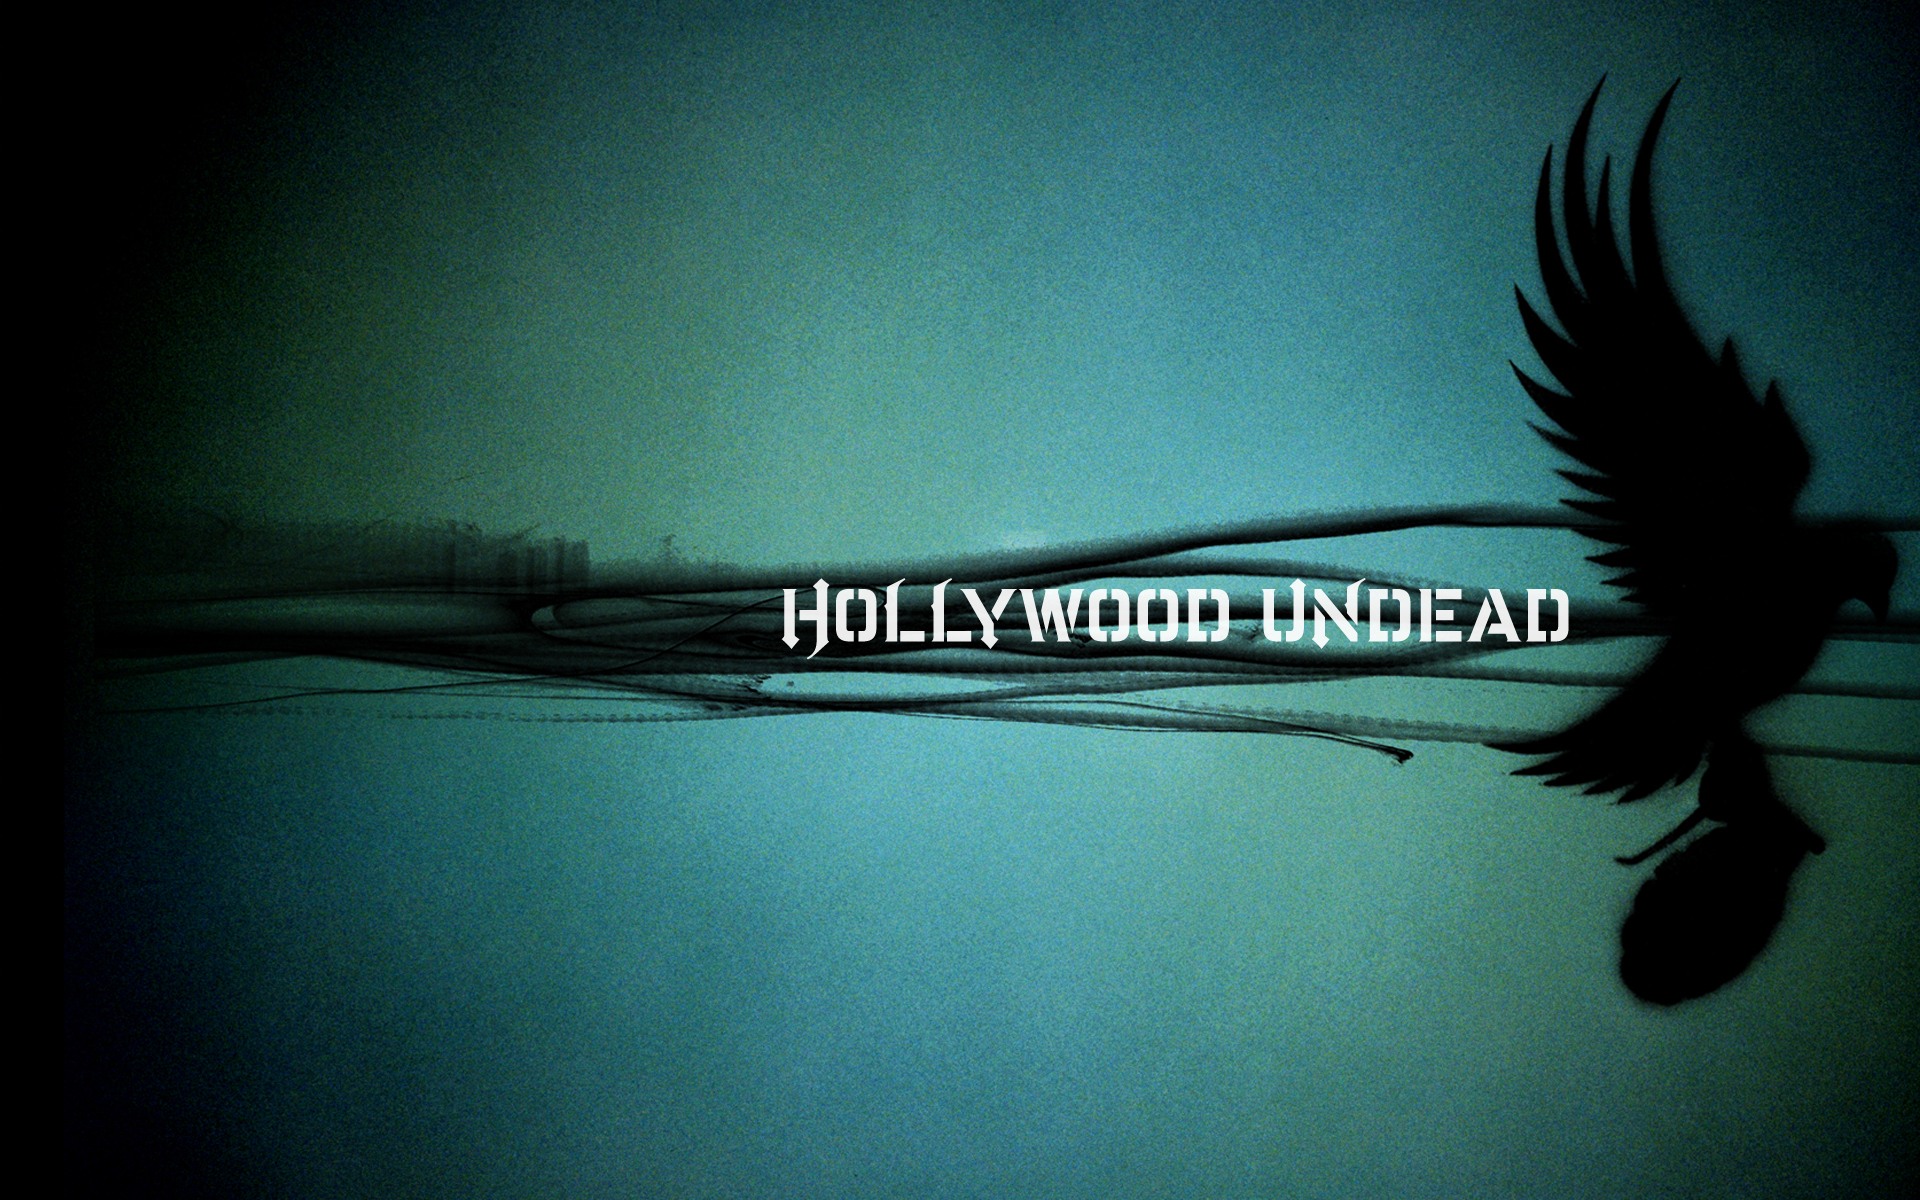 Hollywood Undead wallpaper 1920x1200 53052 WallpaperUP